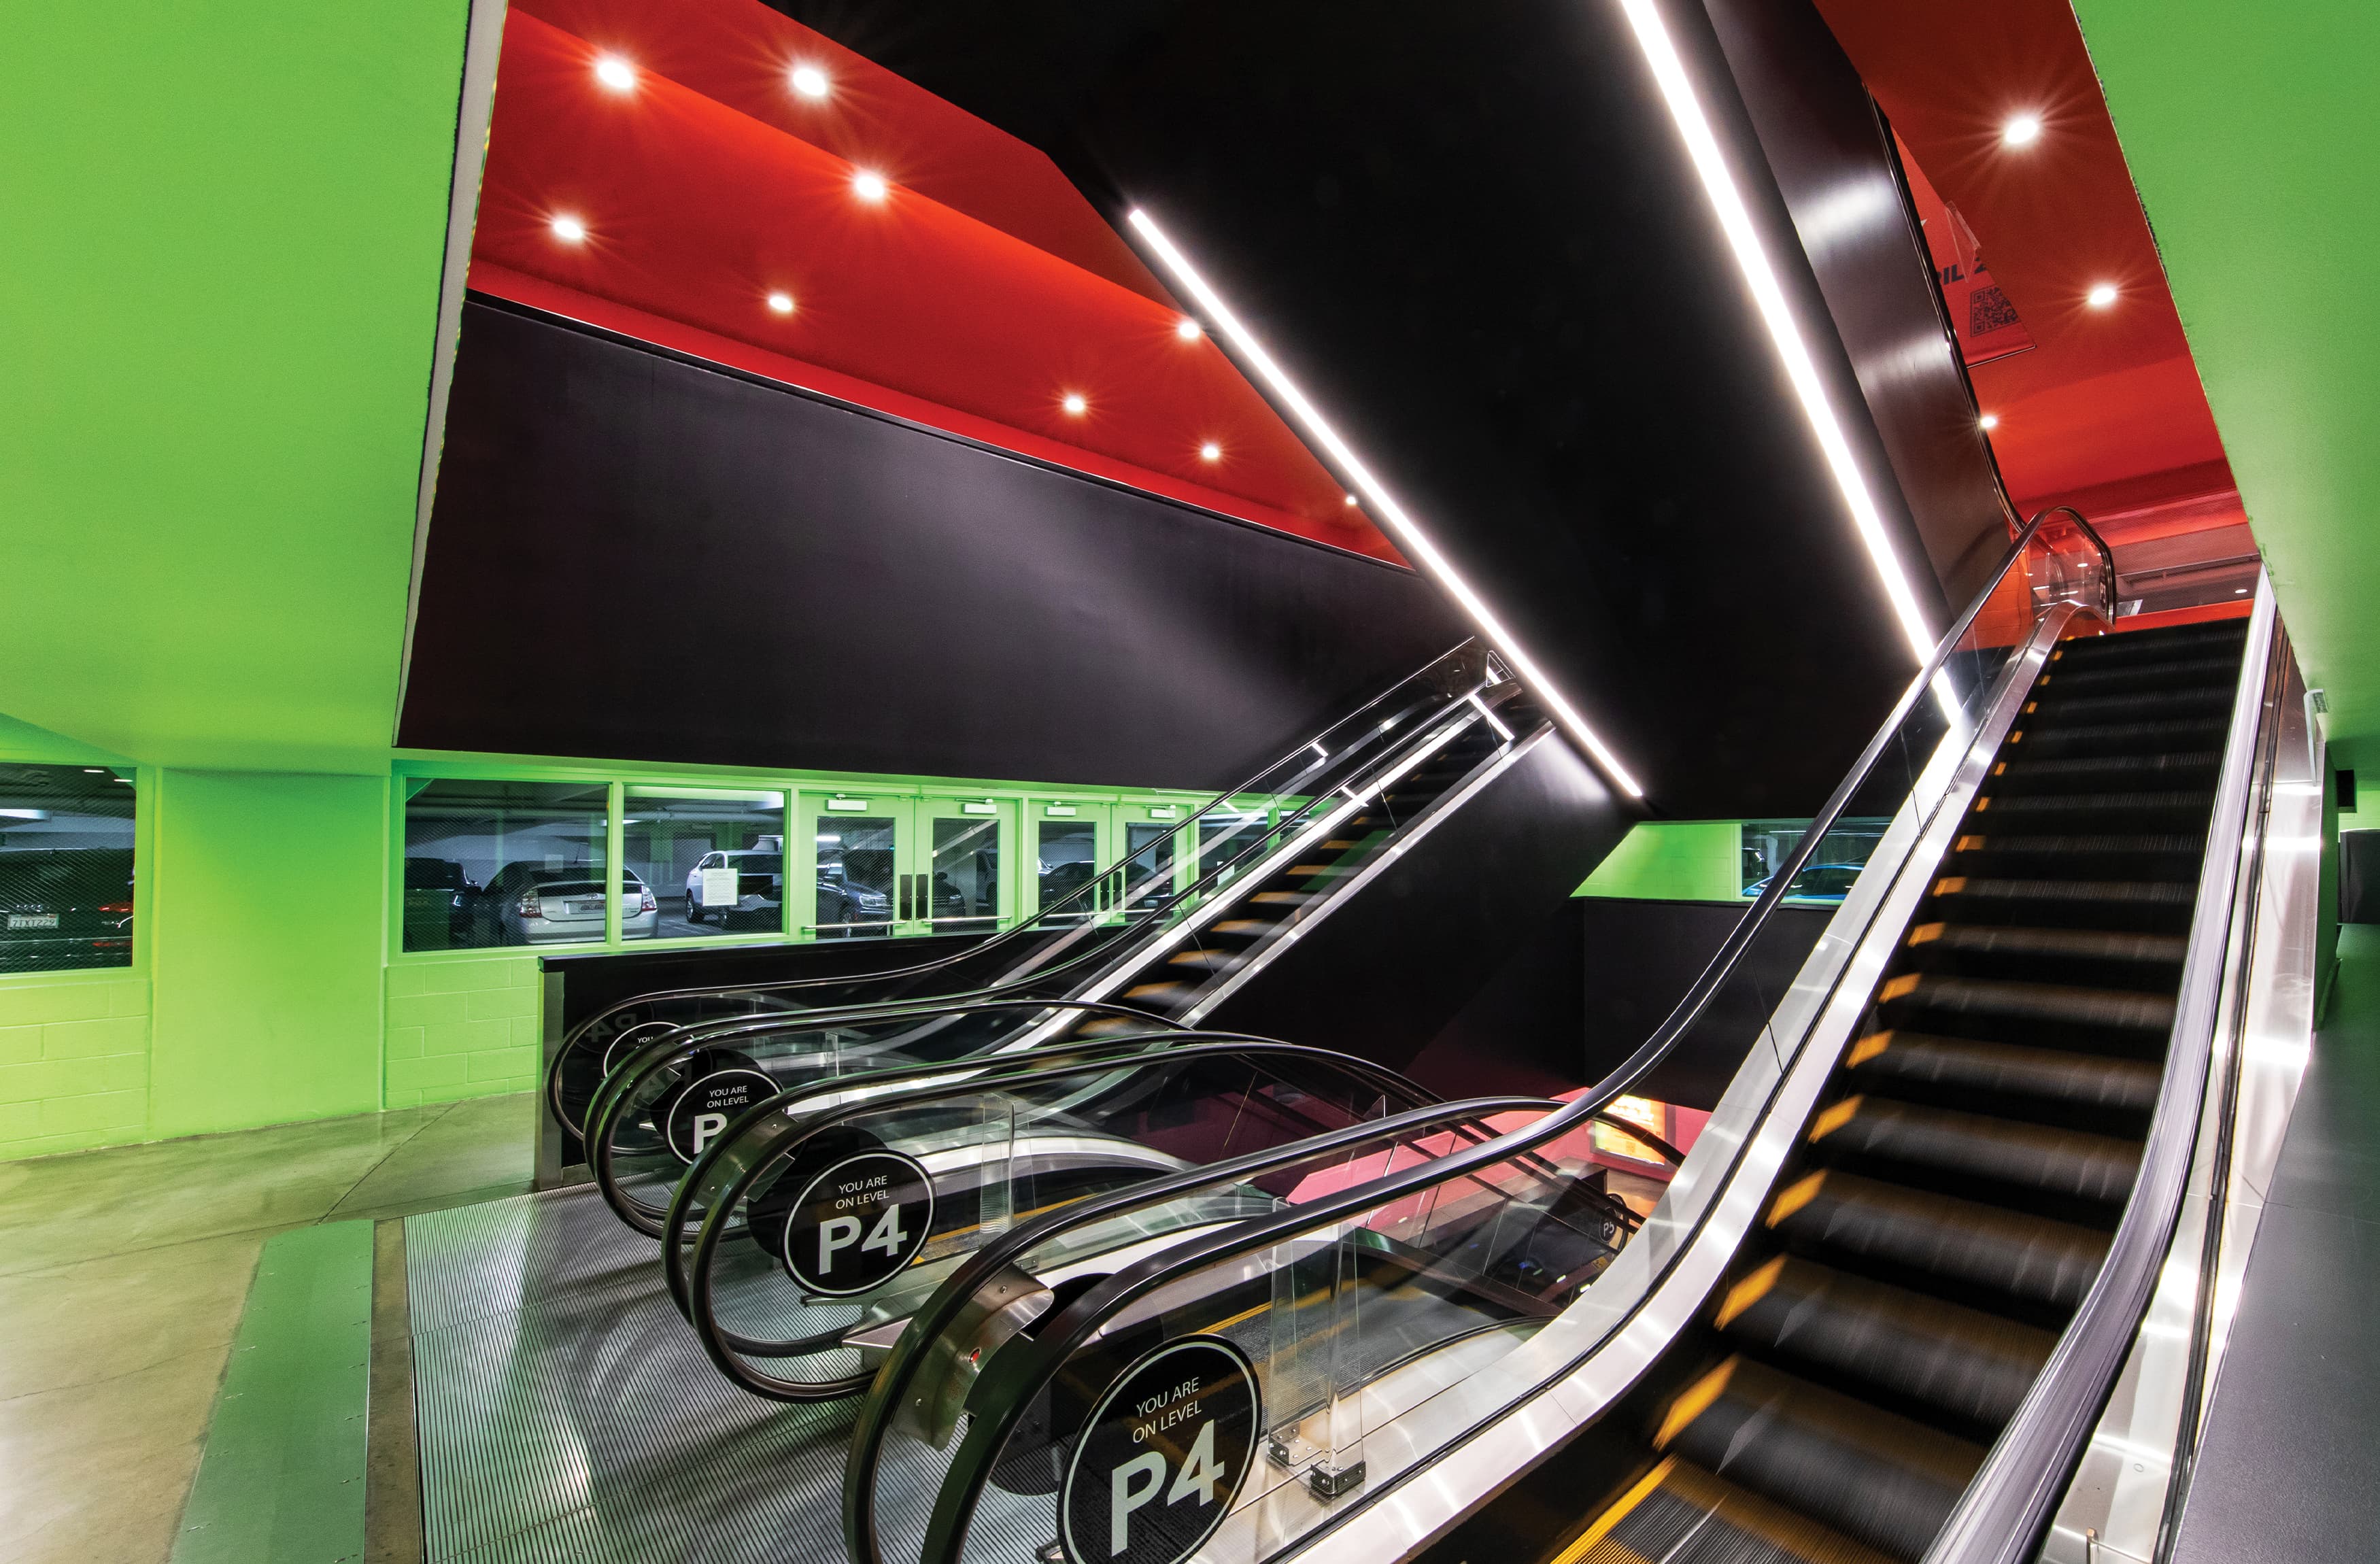 Parking garage escalator level identity in black with white graphics applied to escalator glass by RSM Design for Ovation Hollywood in Los Angeles, California